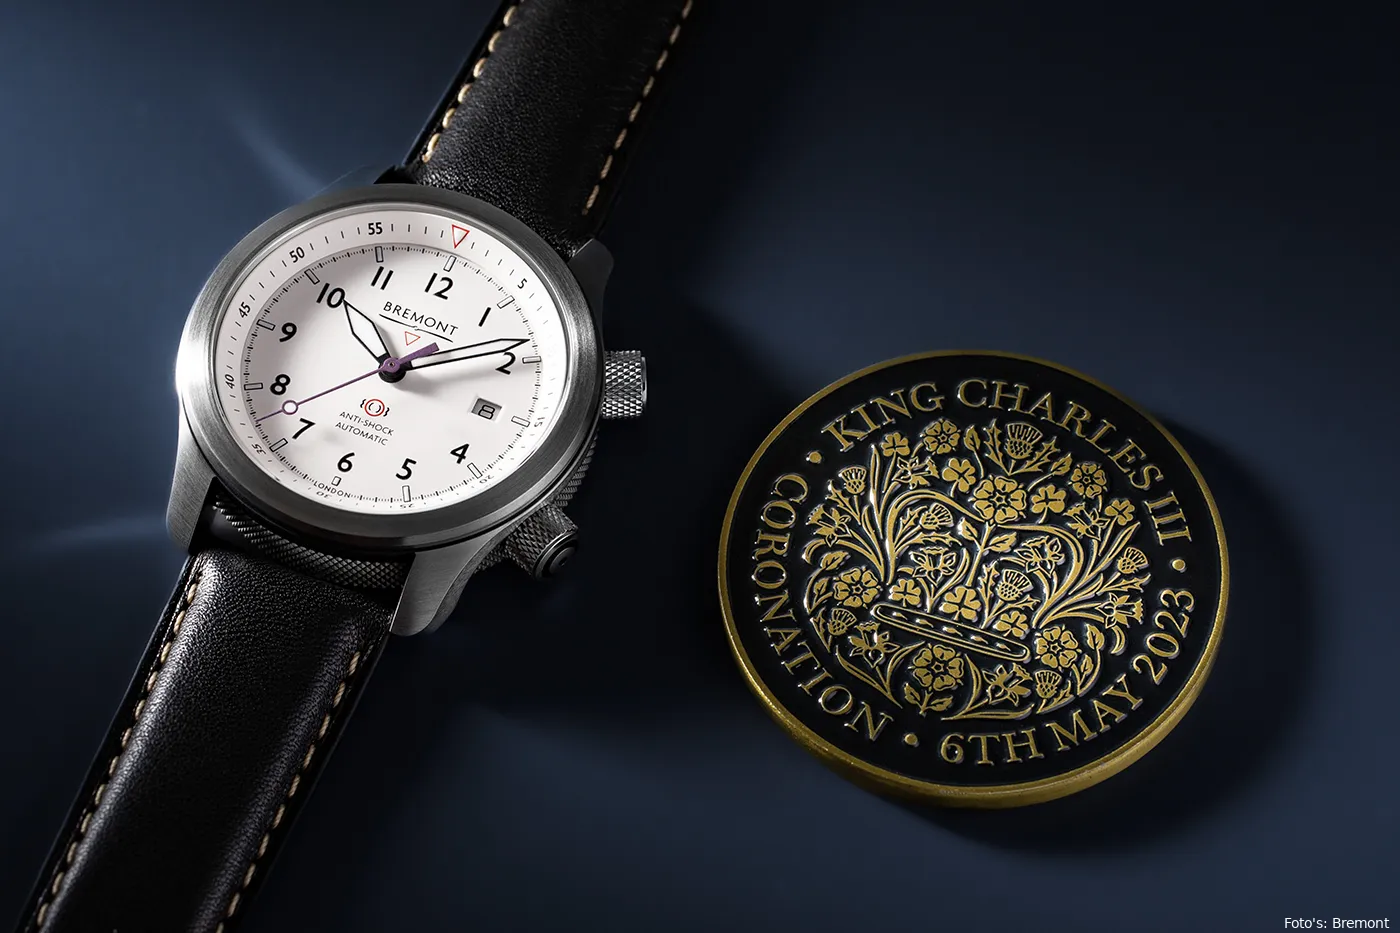 bremont mbii king charles iii limited edition commemorative timepiece release info 003